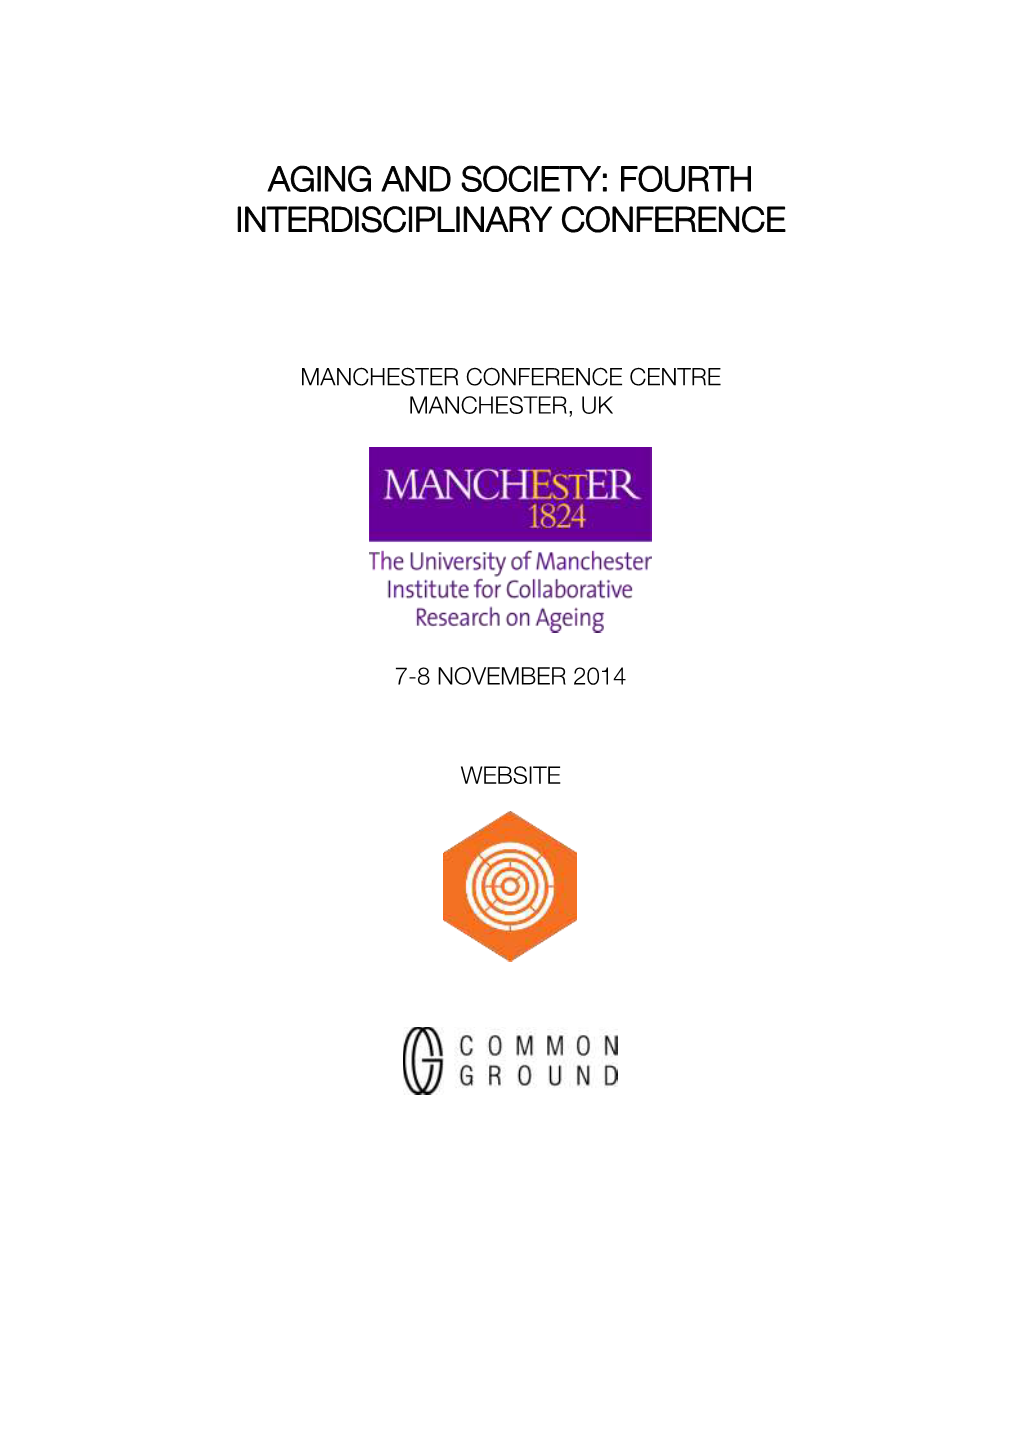 Aging and Society: Fourth Interdisciplinary Conference